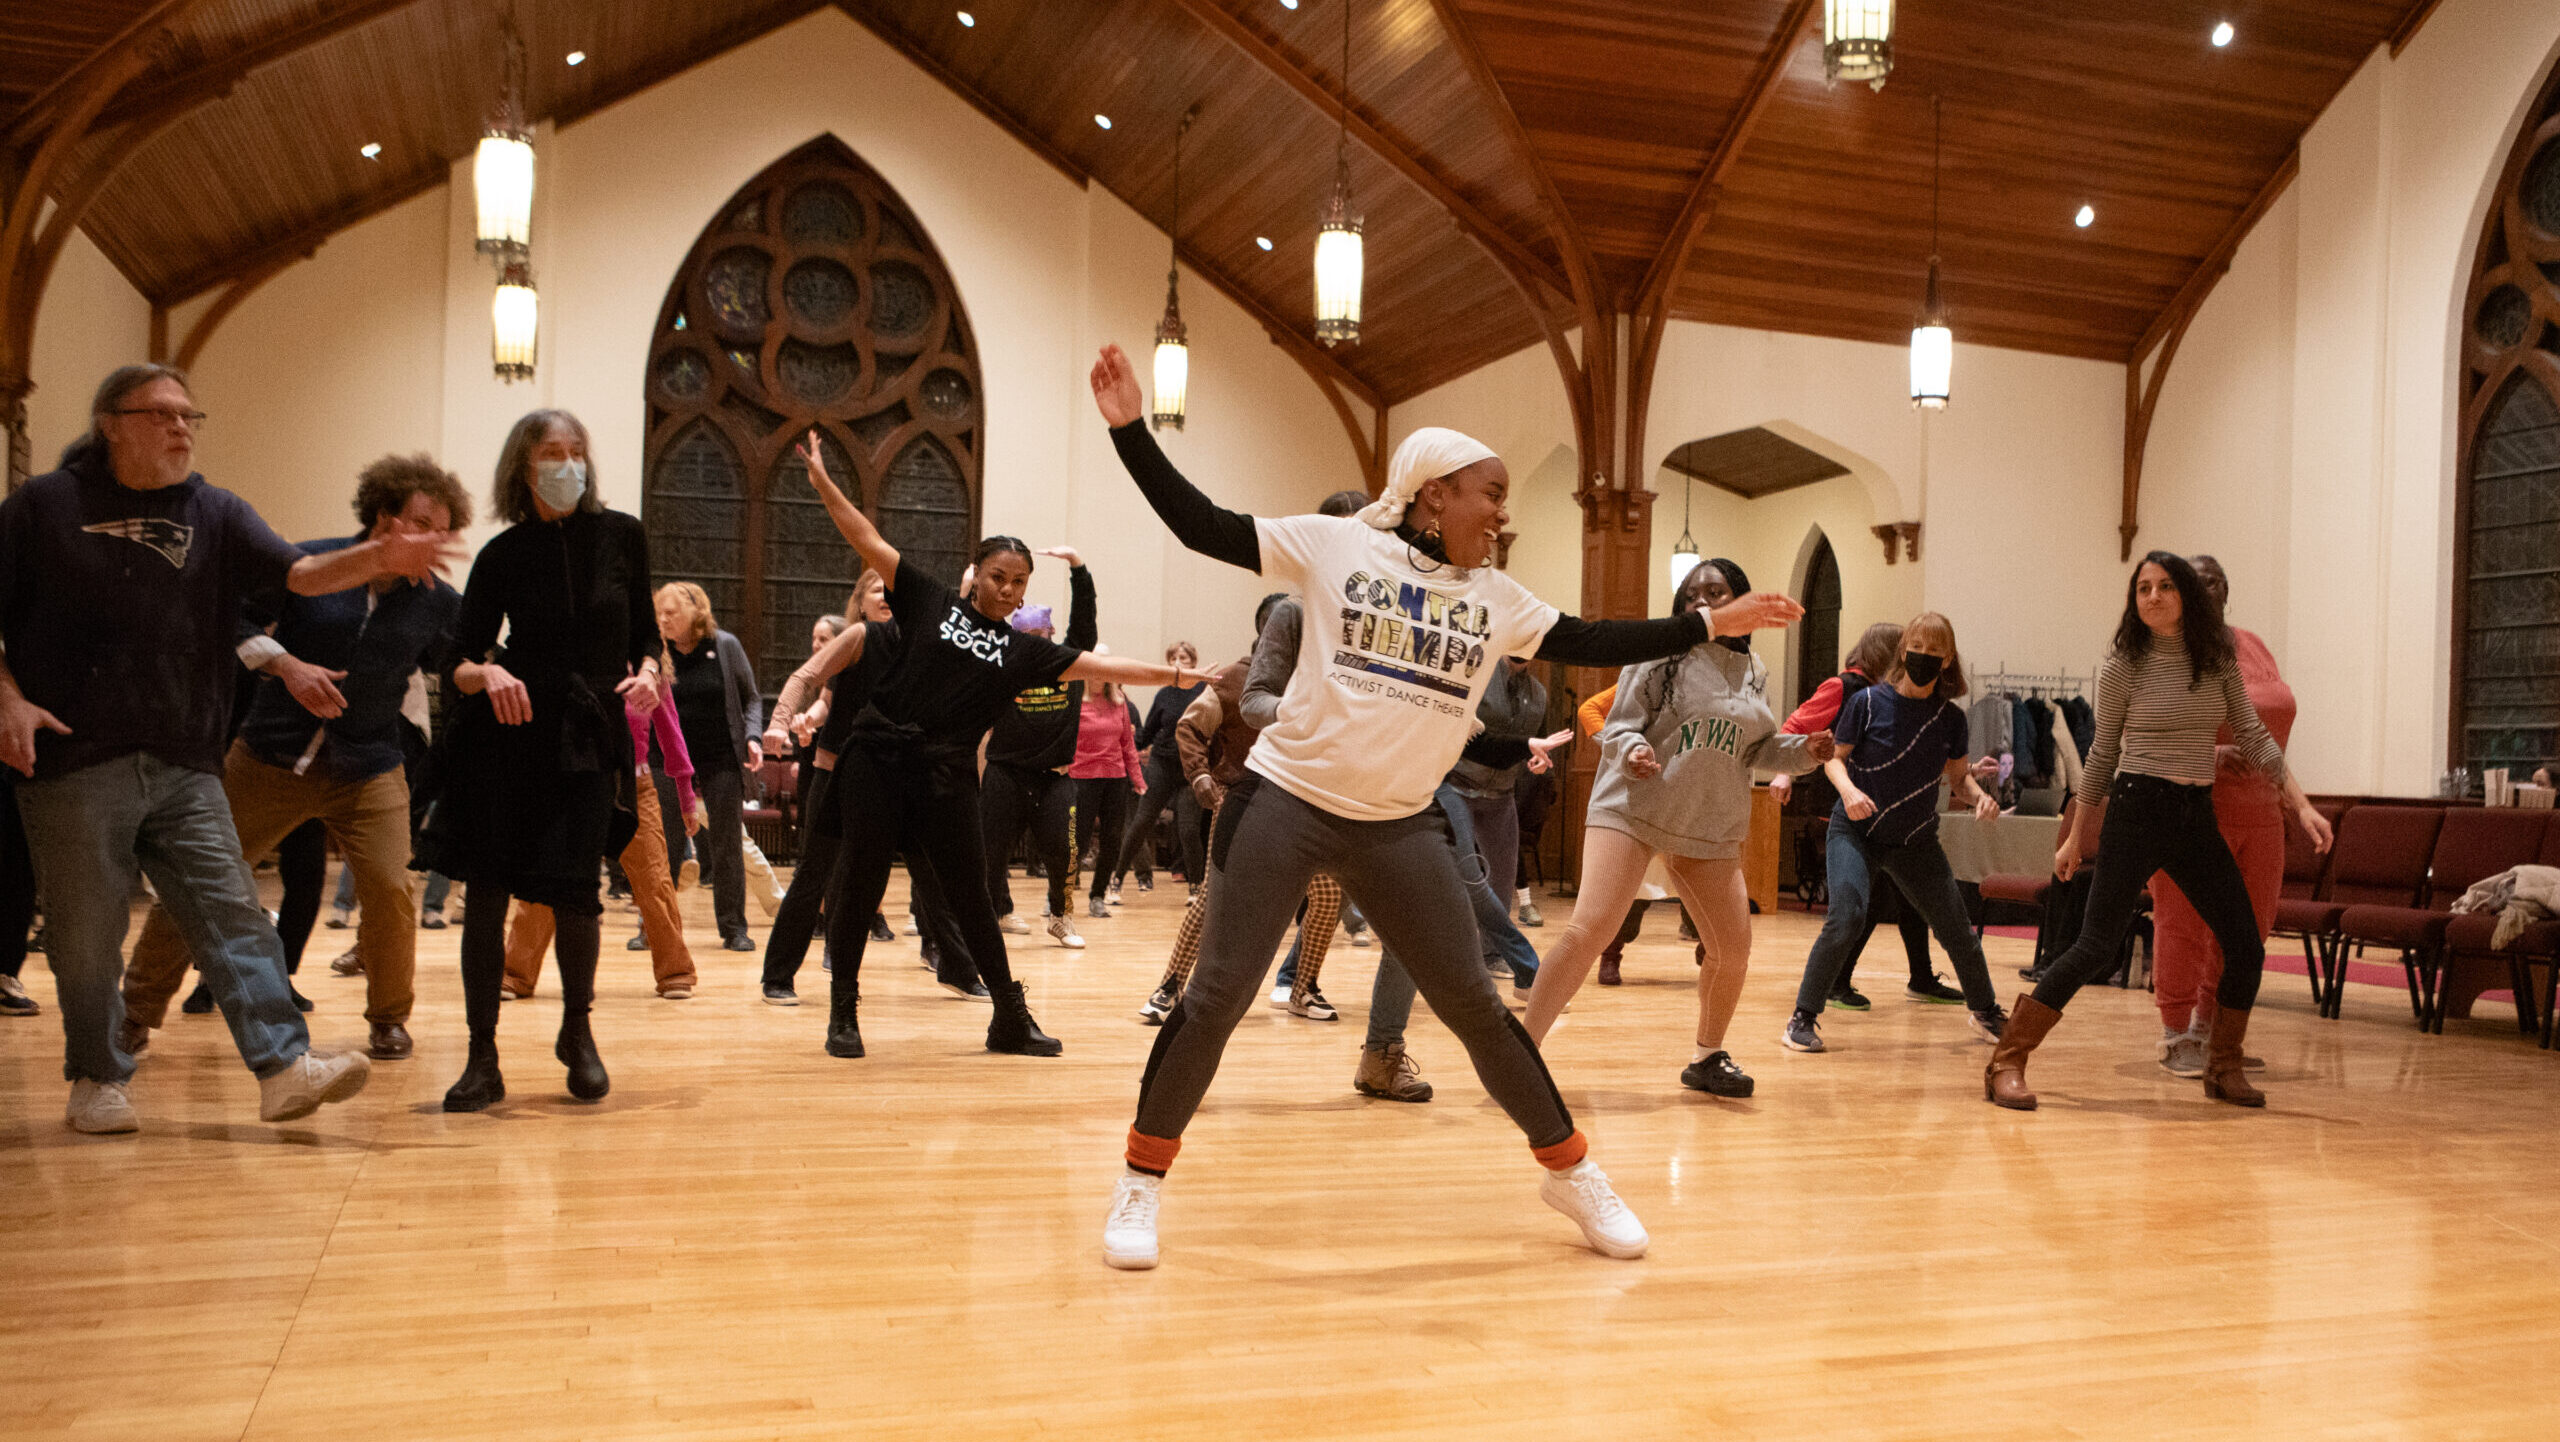 Participants of diverse ages and backgrounds are actively engaged in a dance class in a large Church dance studio with arched windows and wooden floors. The dance instructor stands in the forefront wearing a white headscarf, white Contra-Tiempo t-shirt, and gray pants while striking a pose.